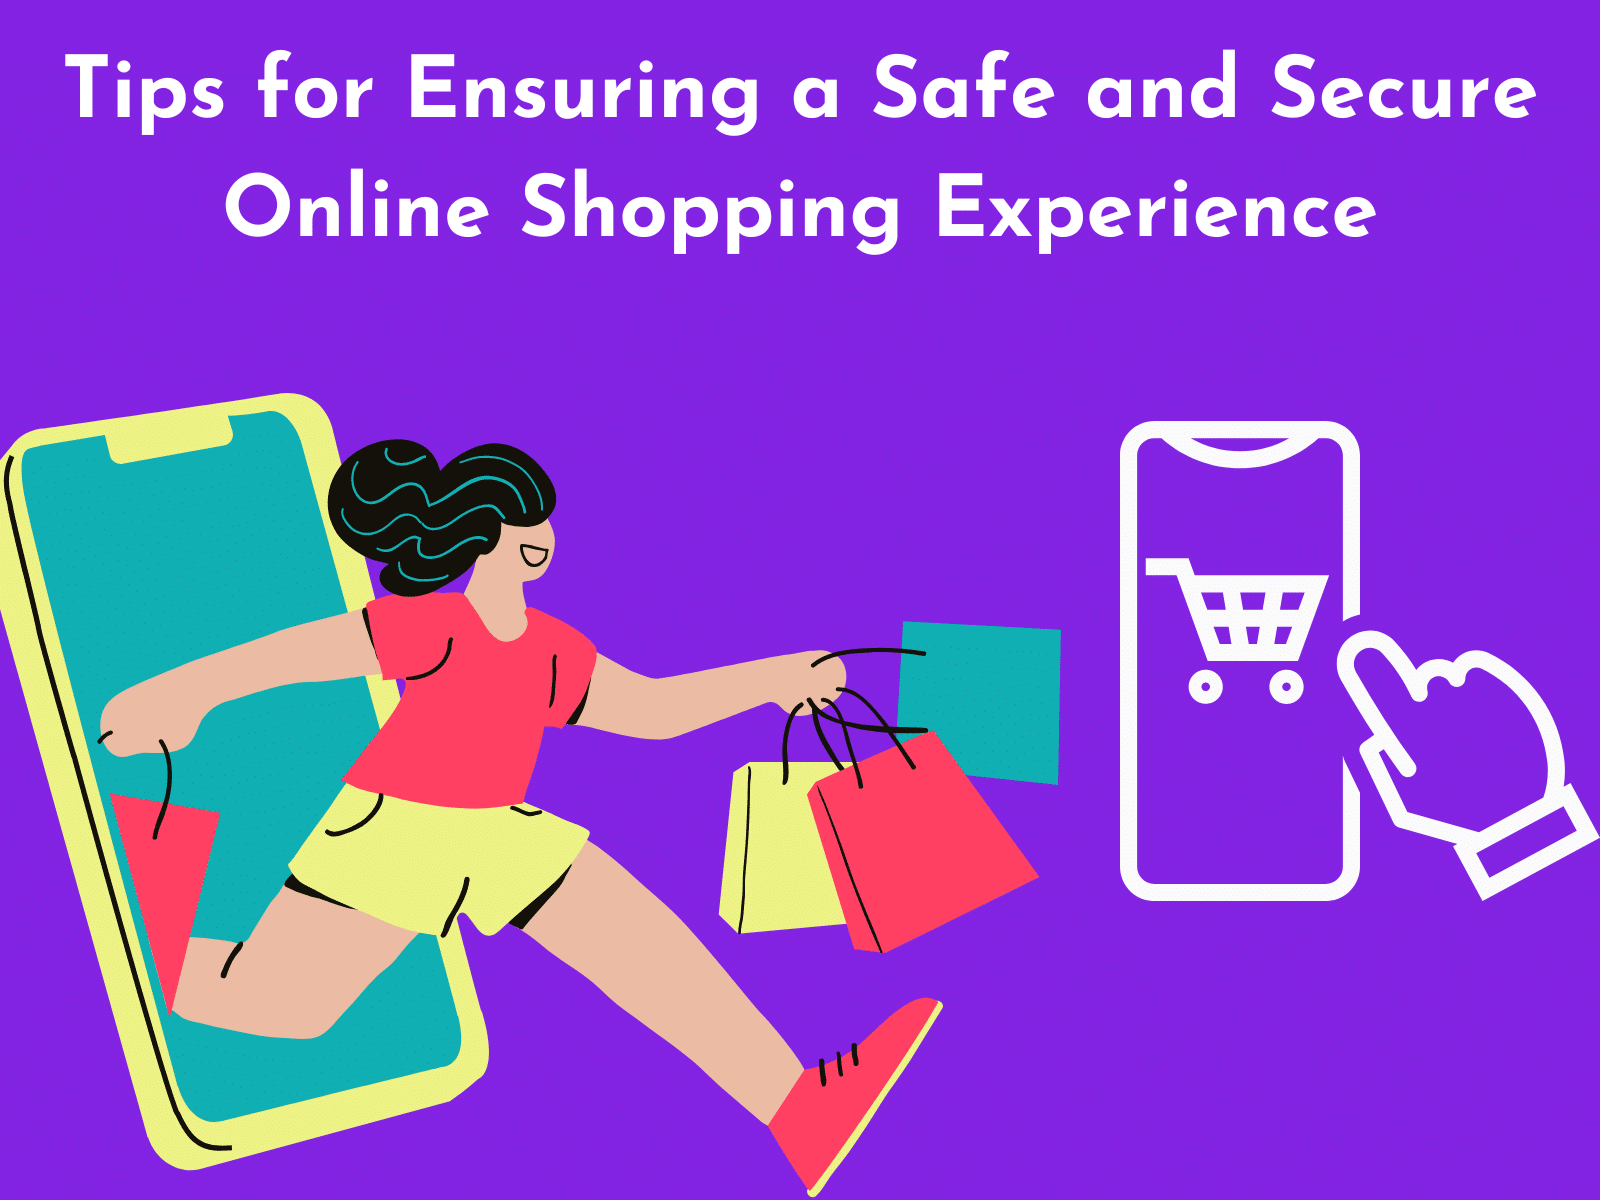 C:\Users\Mohsin\Downloads\Tips for Ensuring a Safe and Secure Online Shopping Experience.png